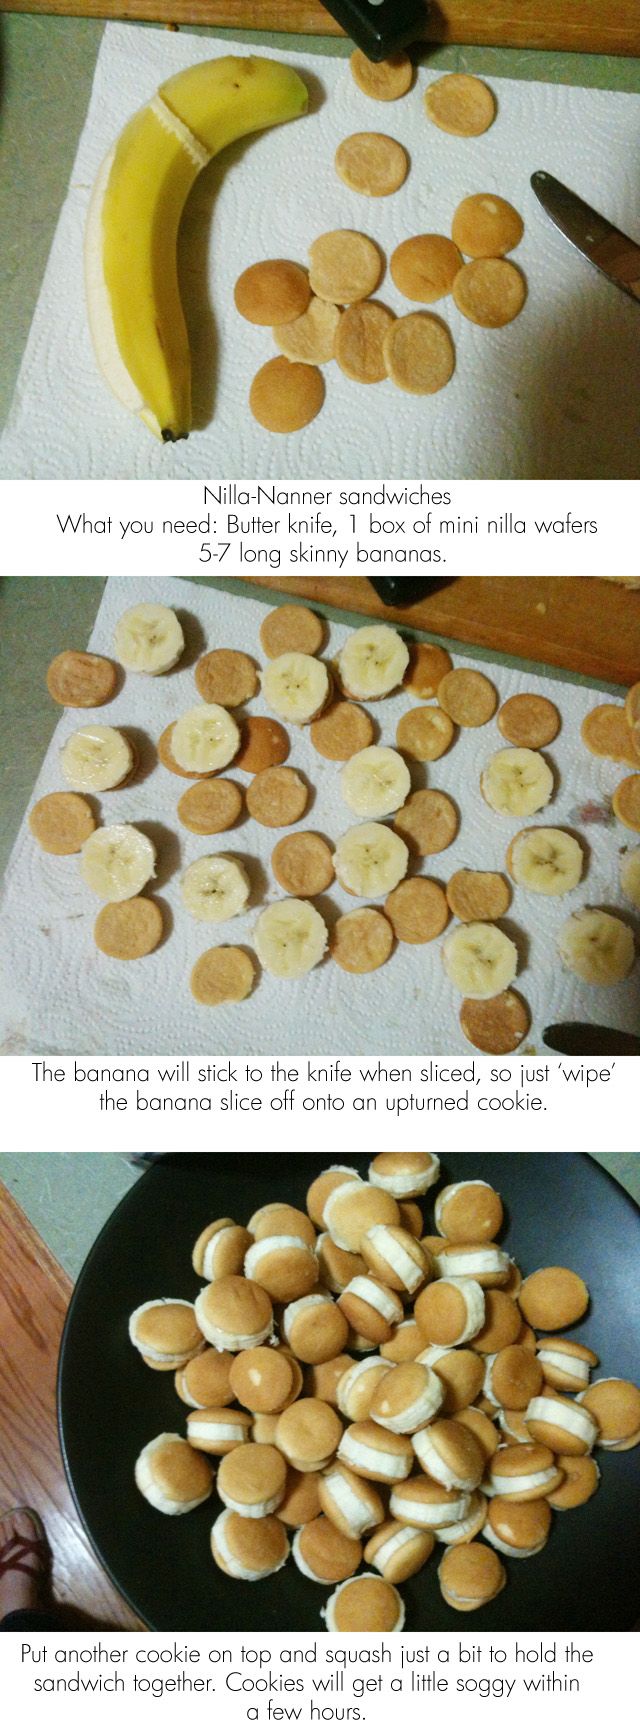 Nilla-Nanner Sandwiches. Added a smear of peanut butter to add some protein – fa